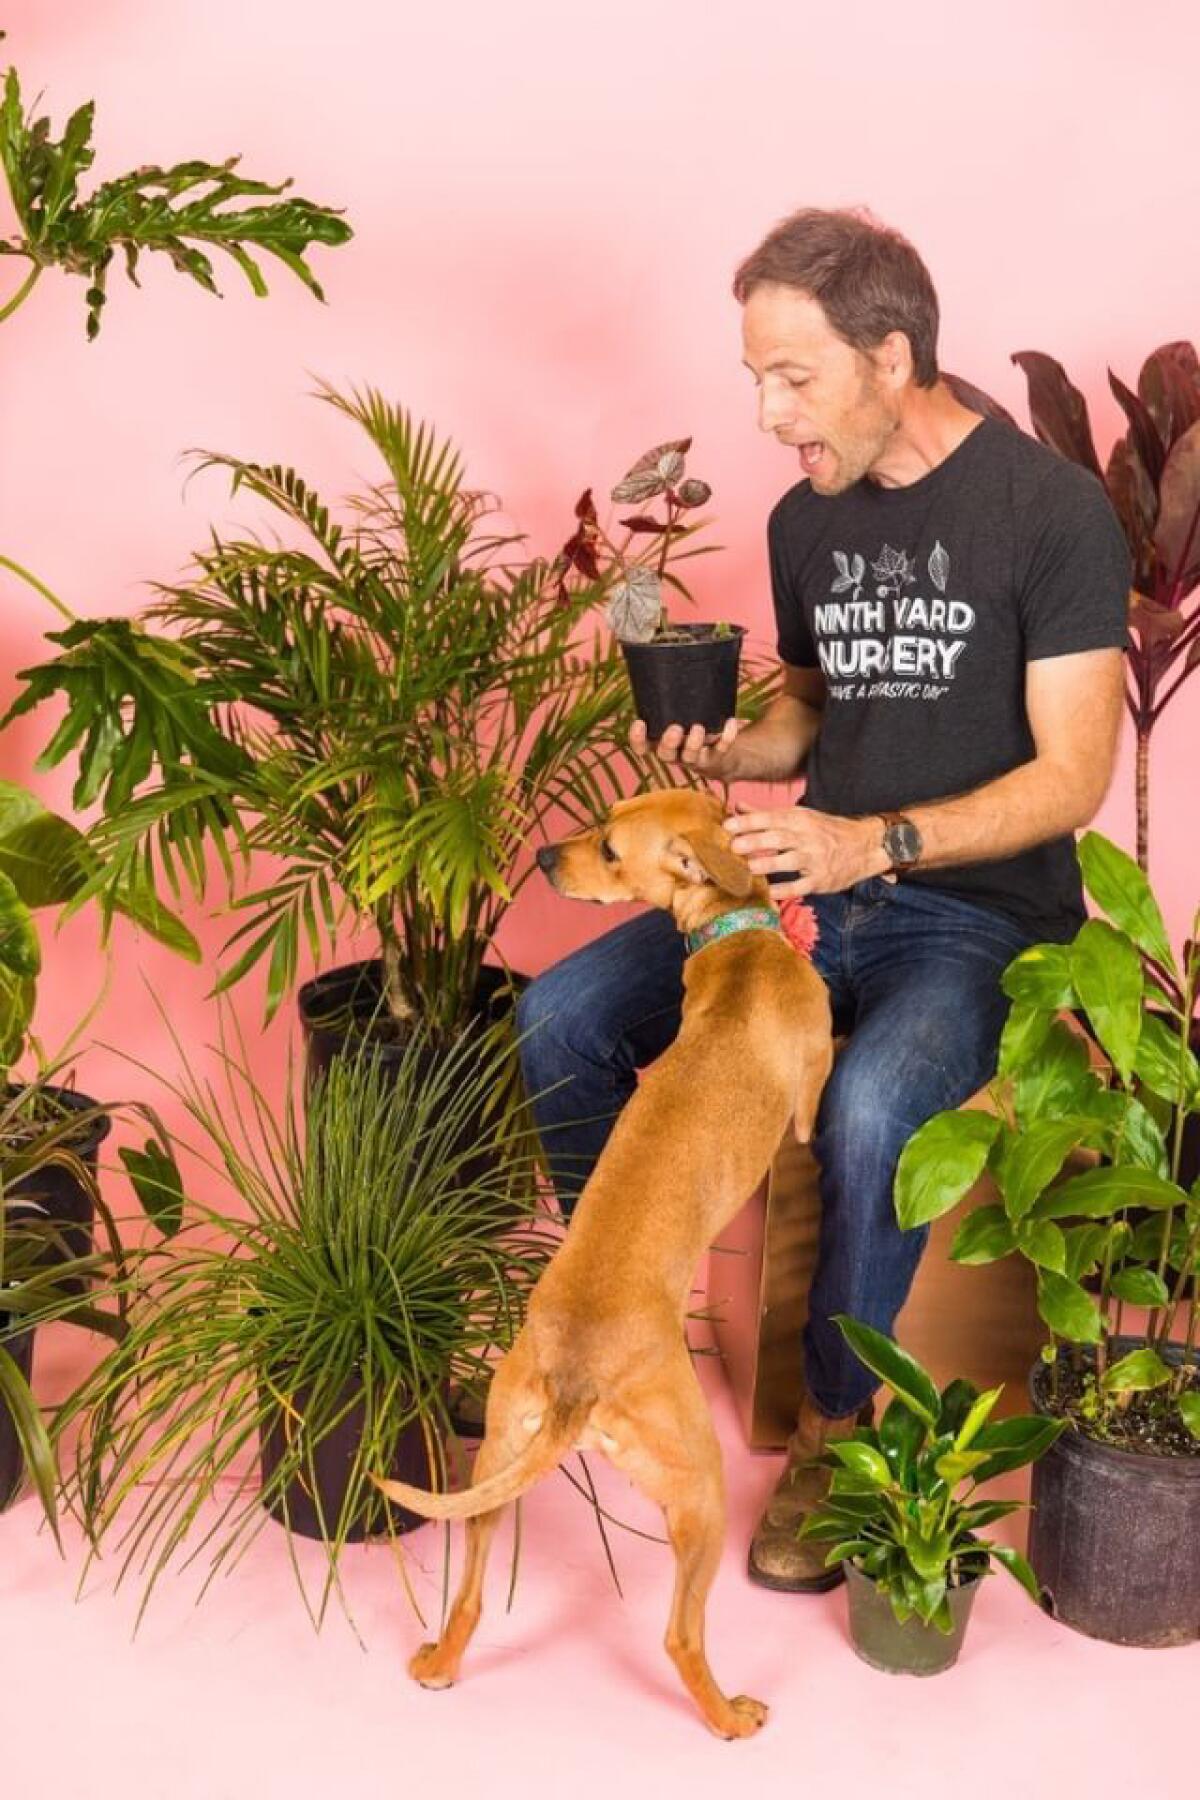 Mark Sanders pictured with his plants and "swamp pup," Wendy